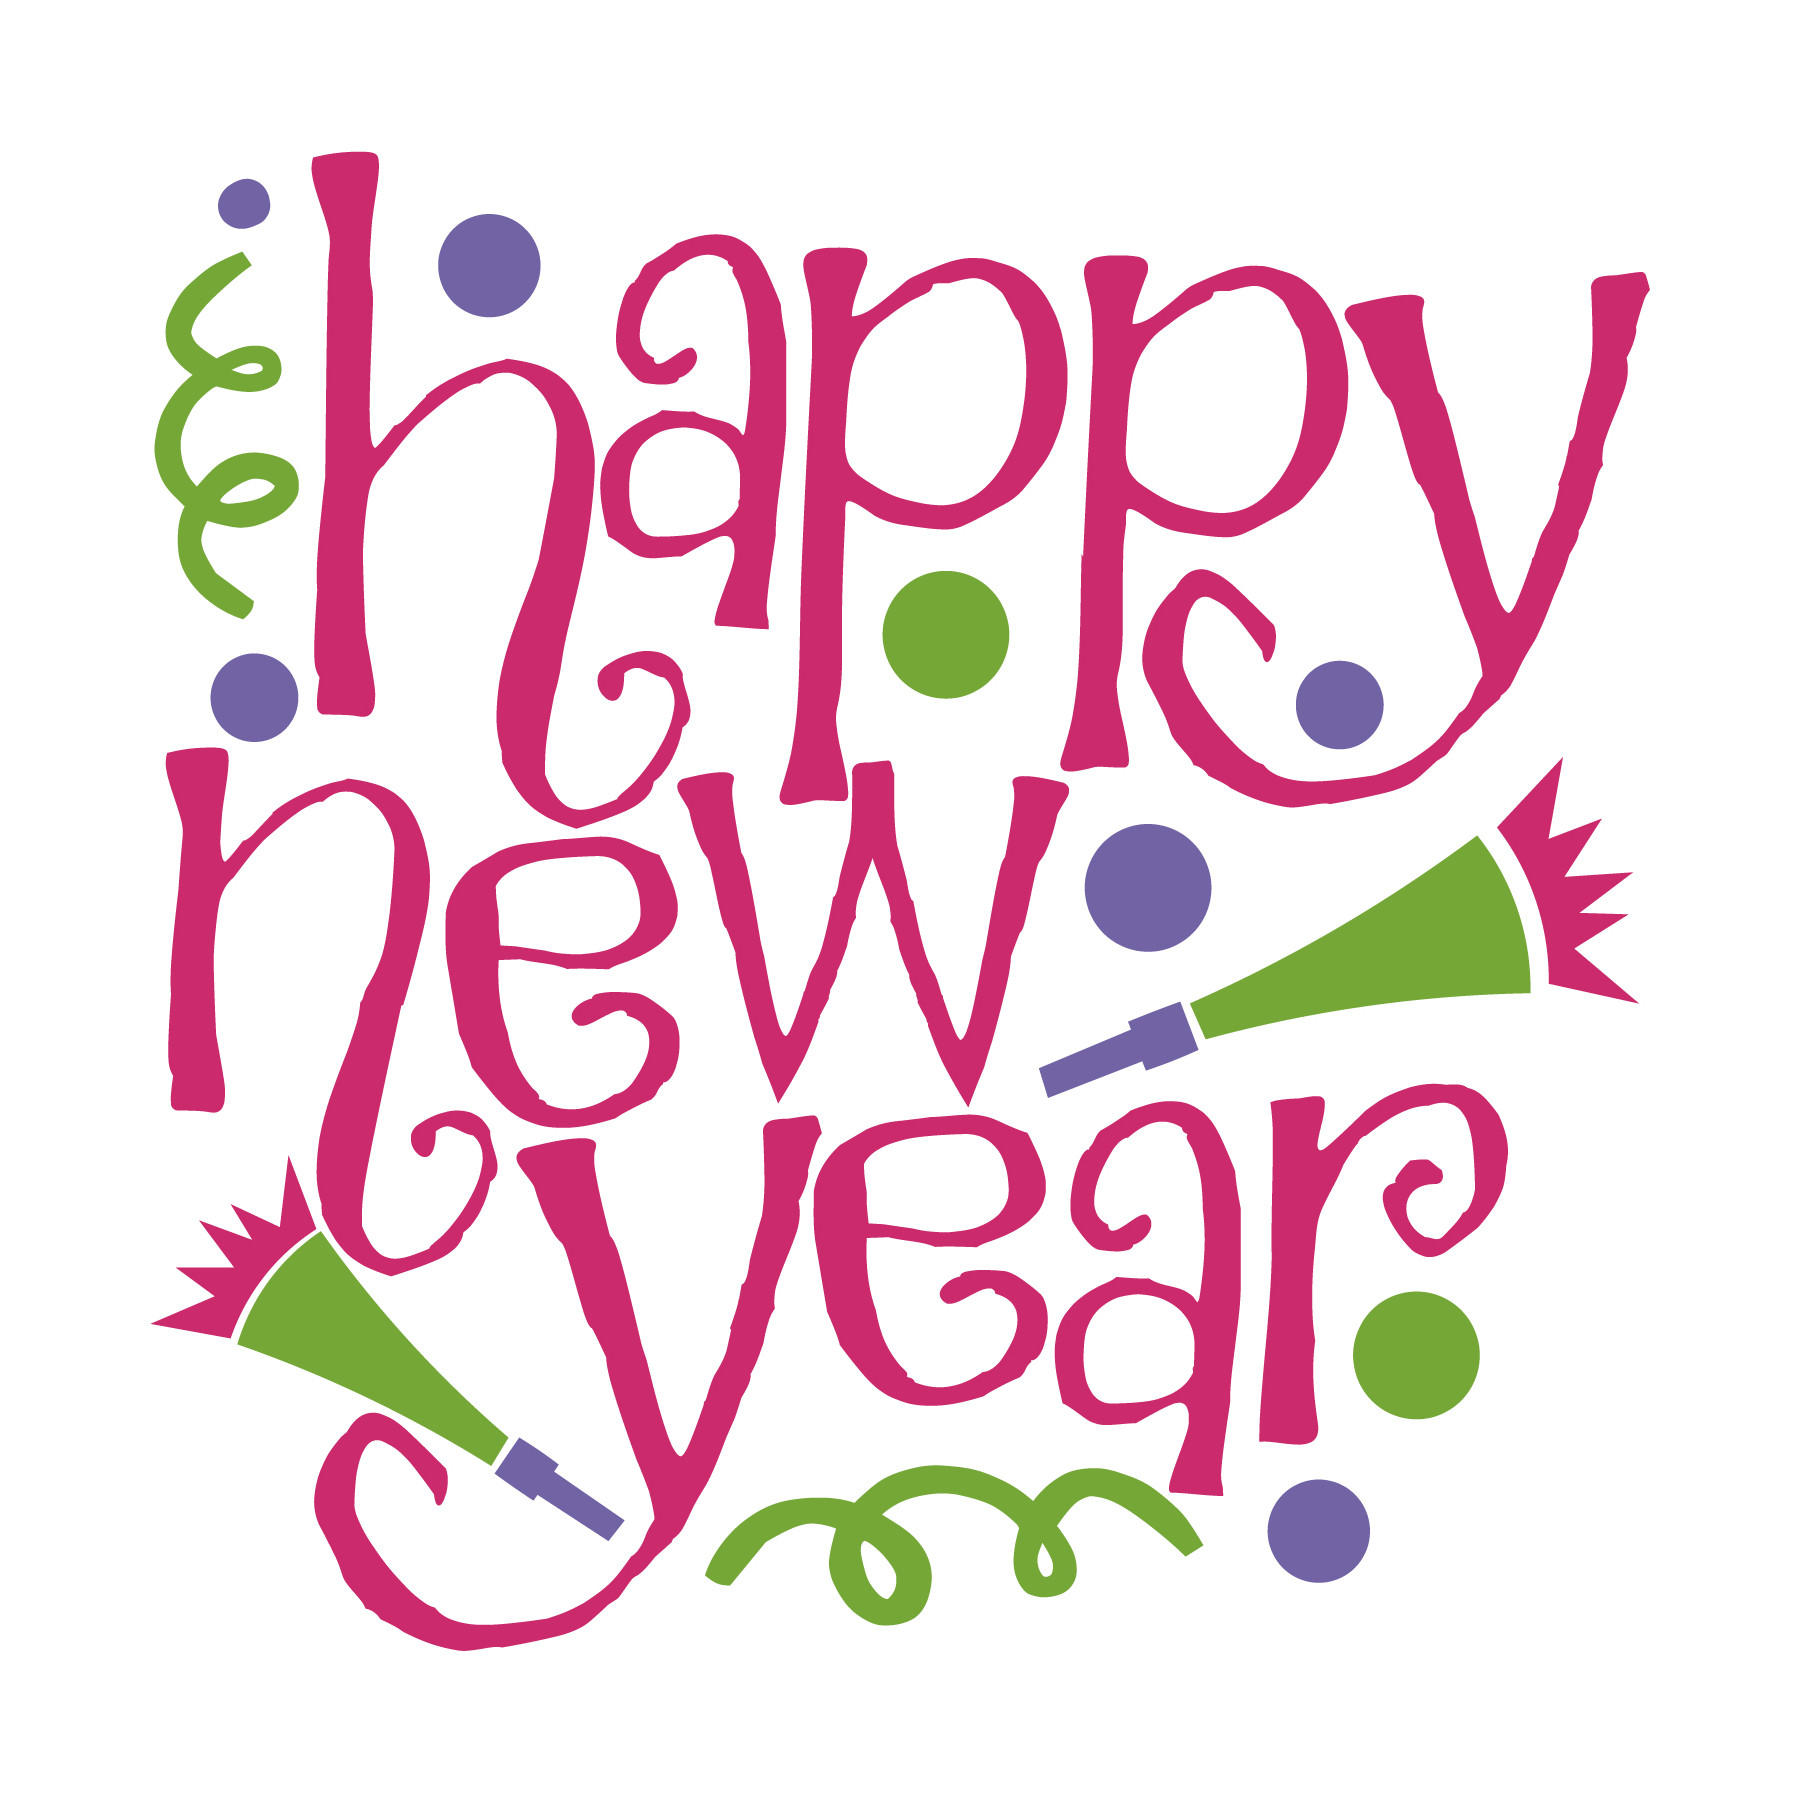 new years eve clipart 2015 - photo #30